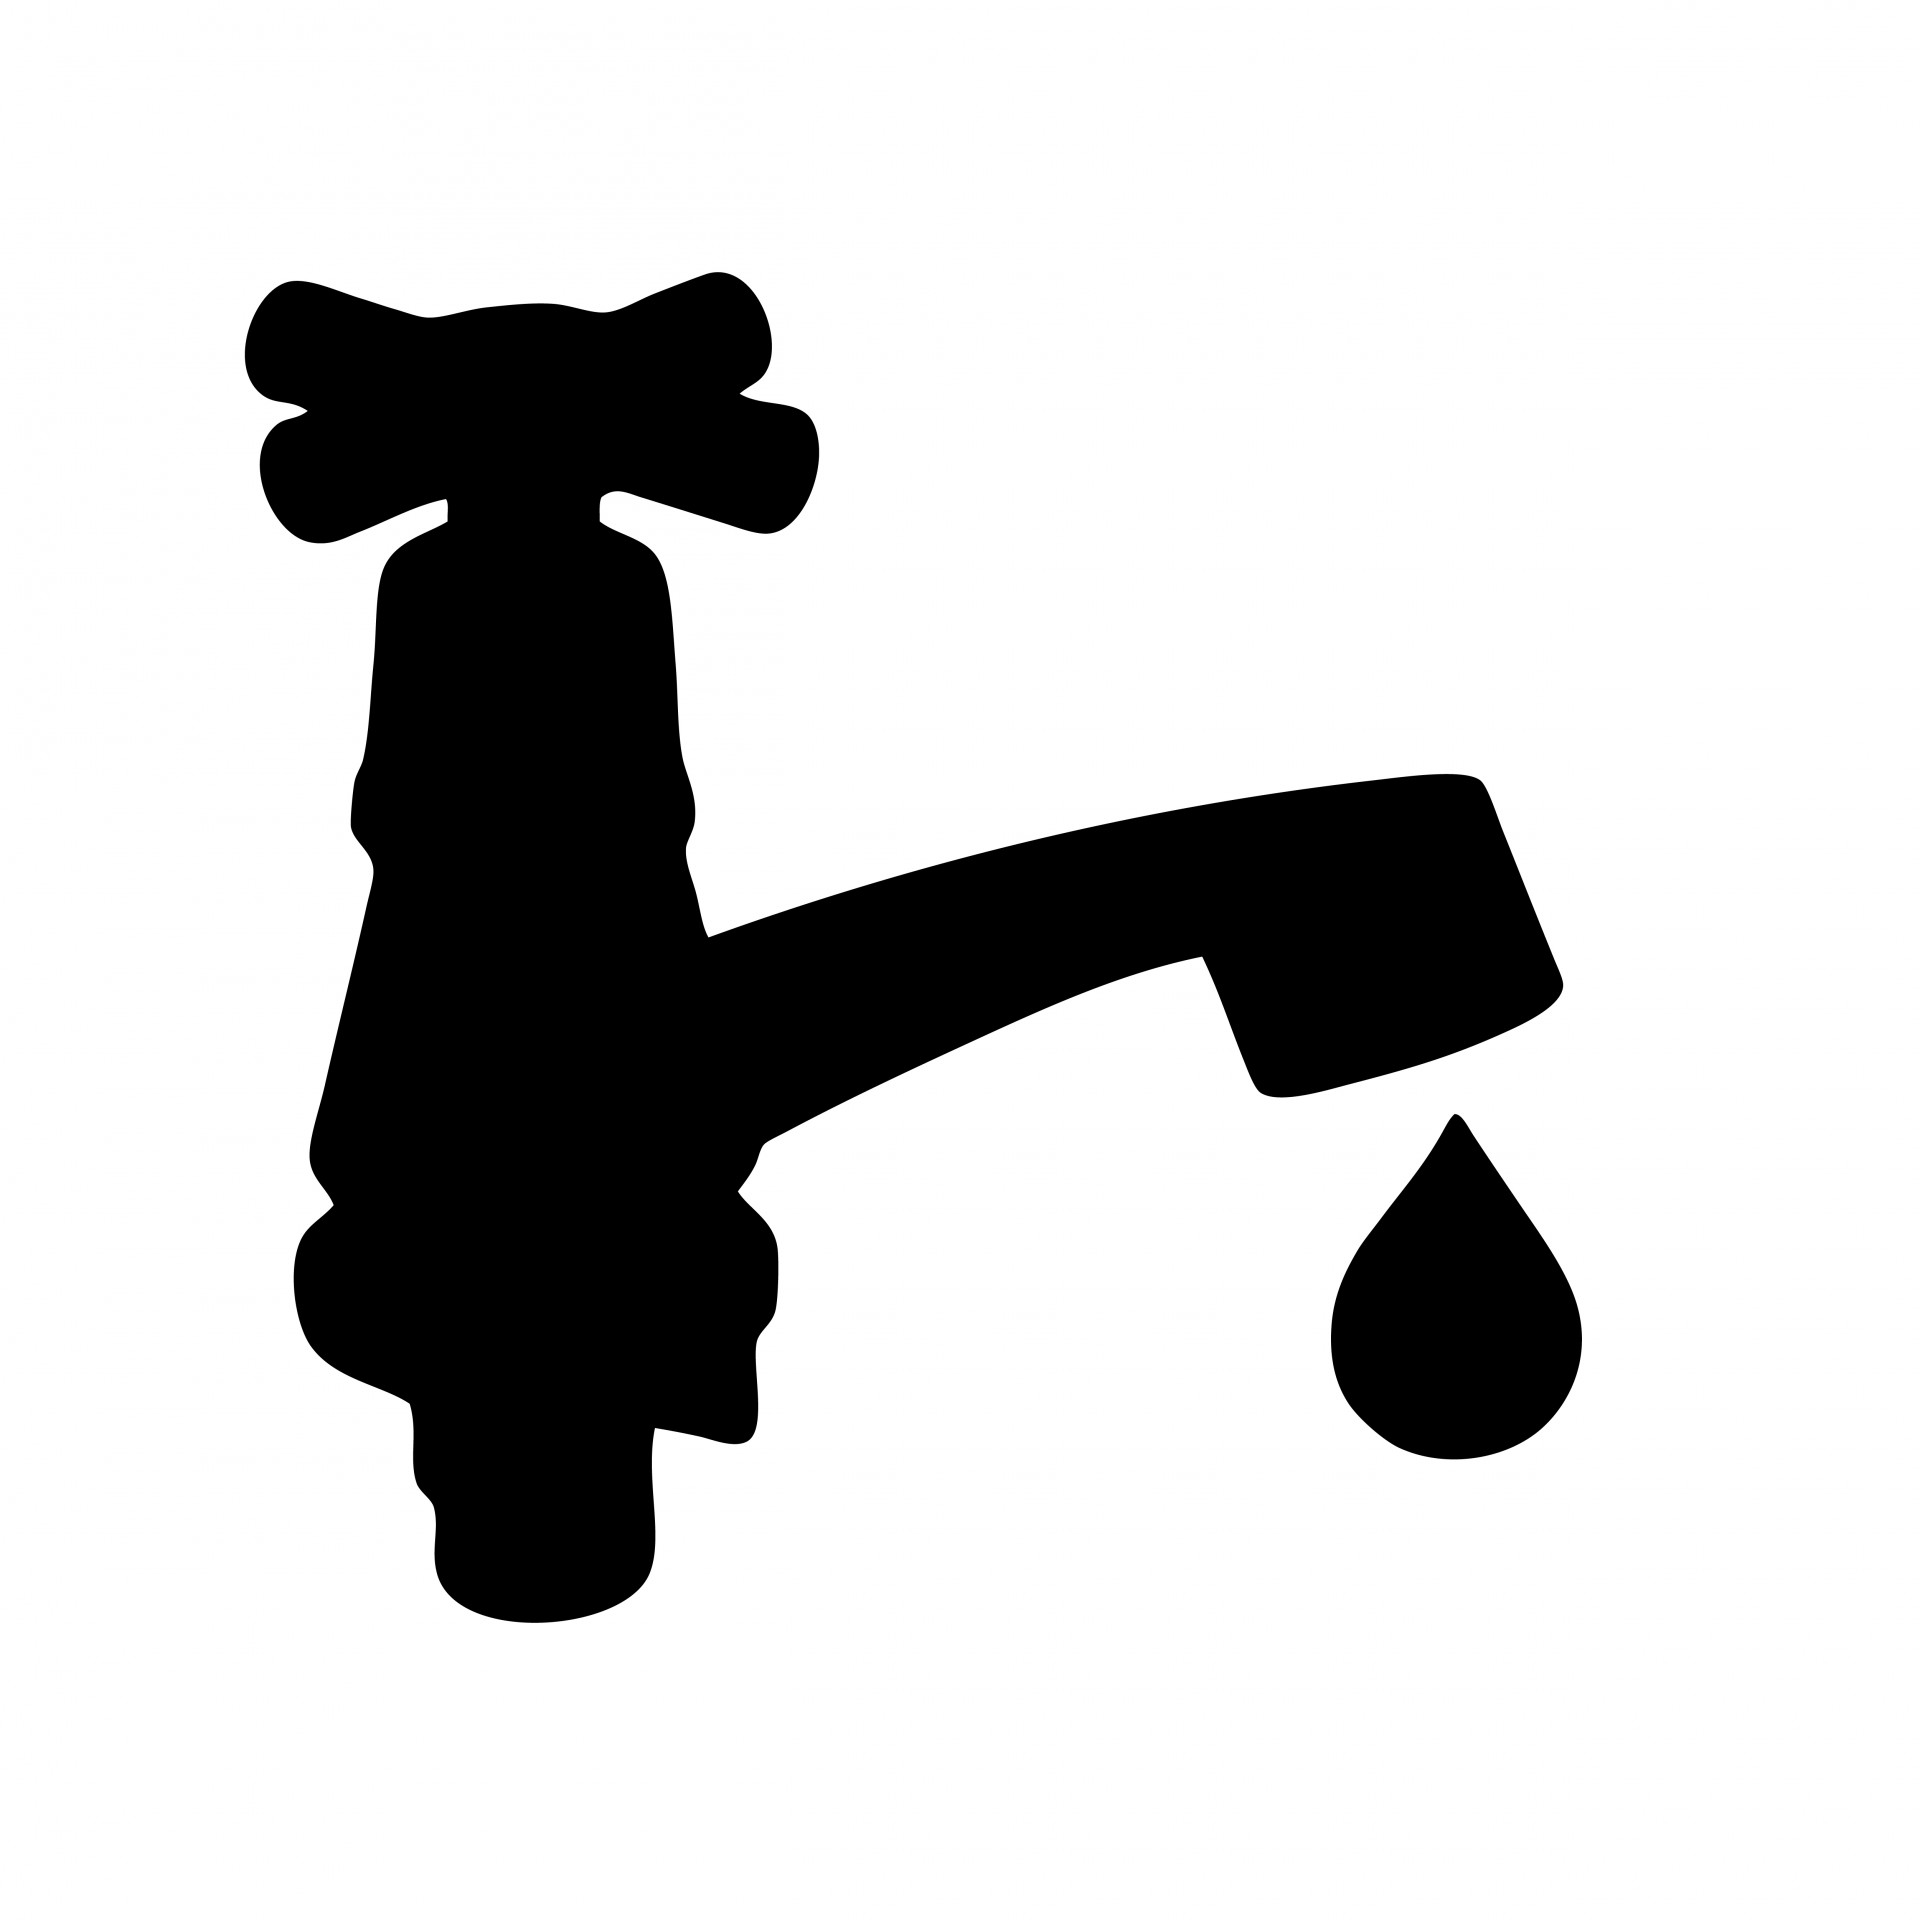 Faucet clipart. Dripping free stock photo